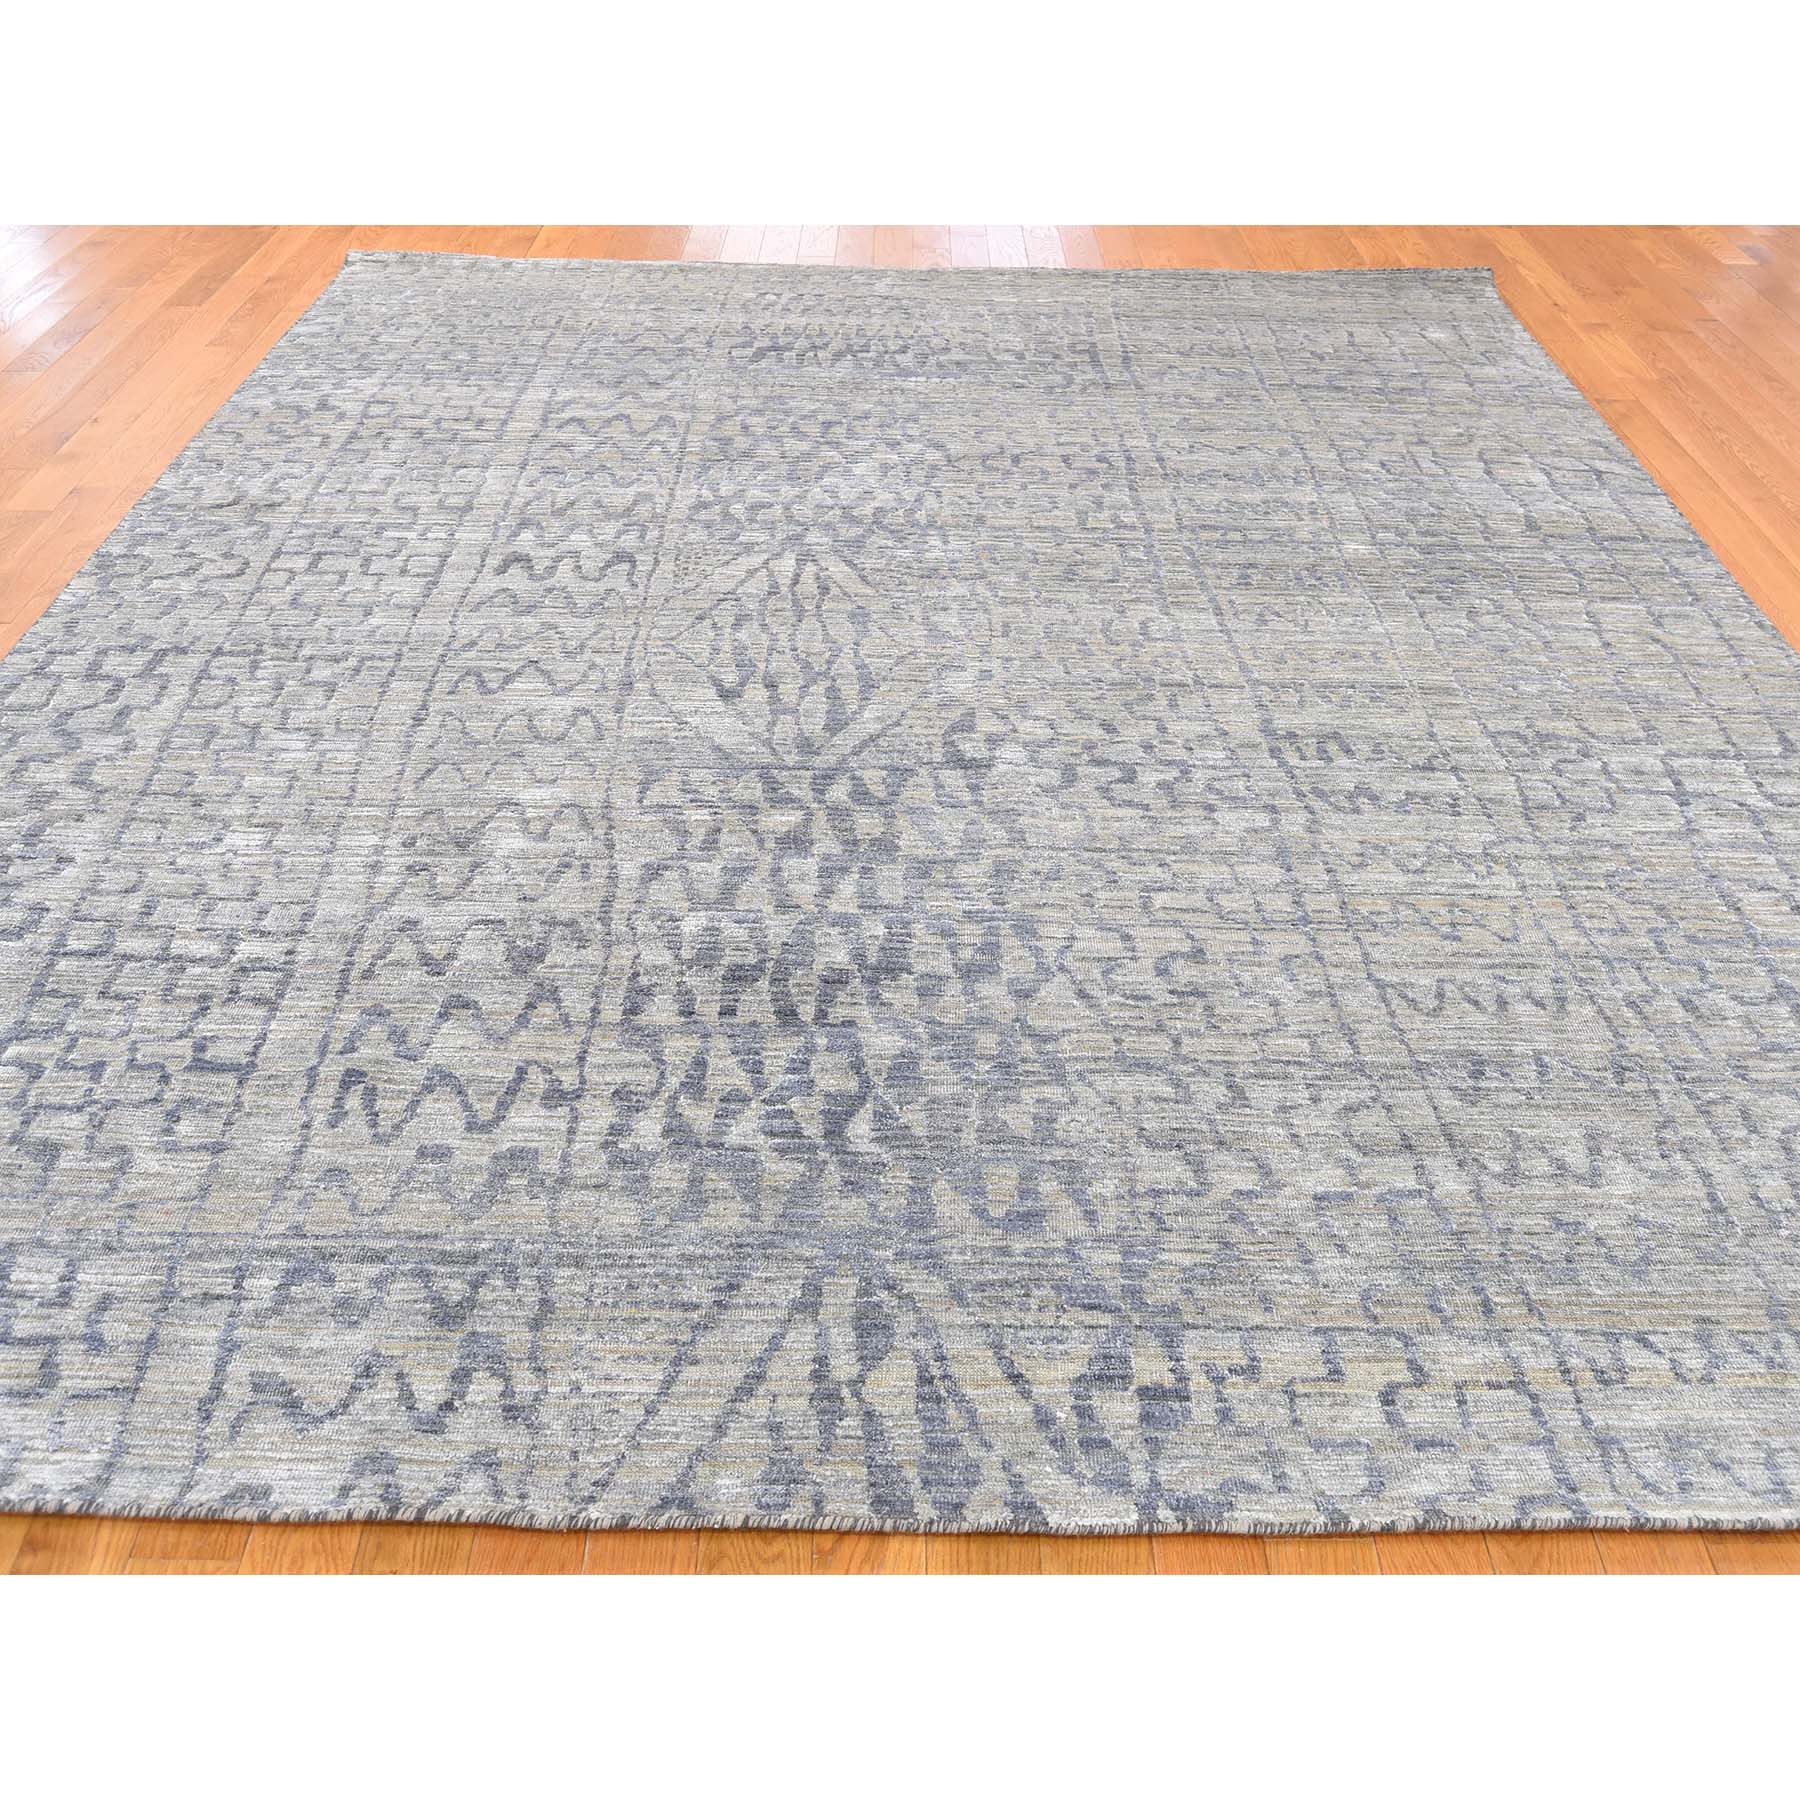 8'x10'1" THE ERASED MOROCCAN Silk with Textured Wool Hand Woven Oriental Rug 